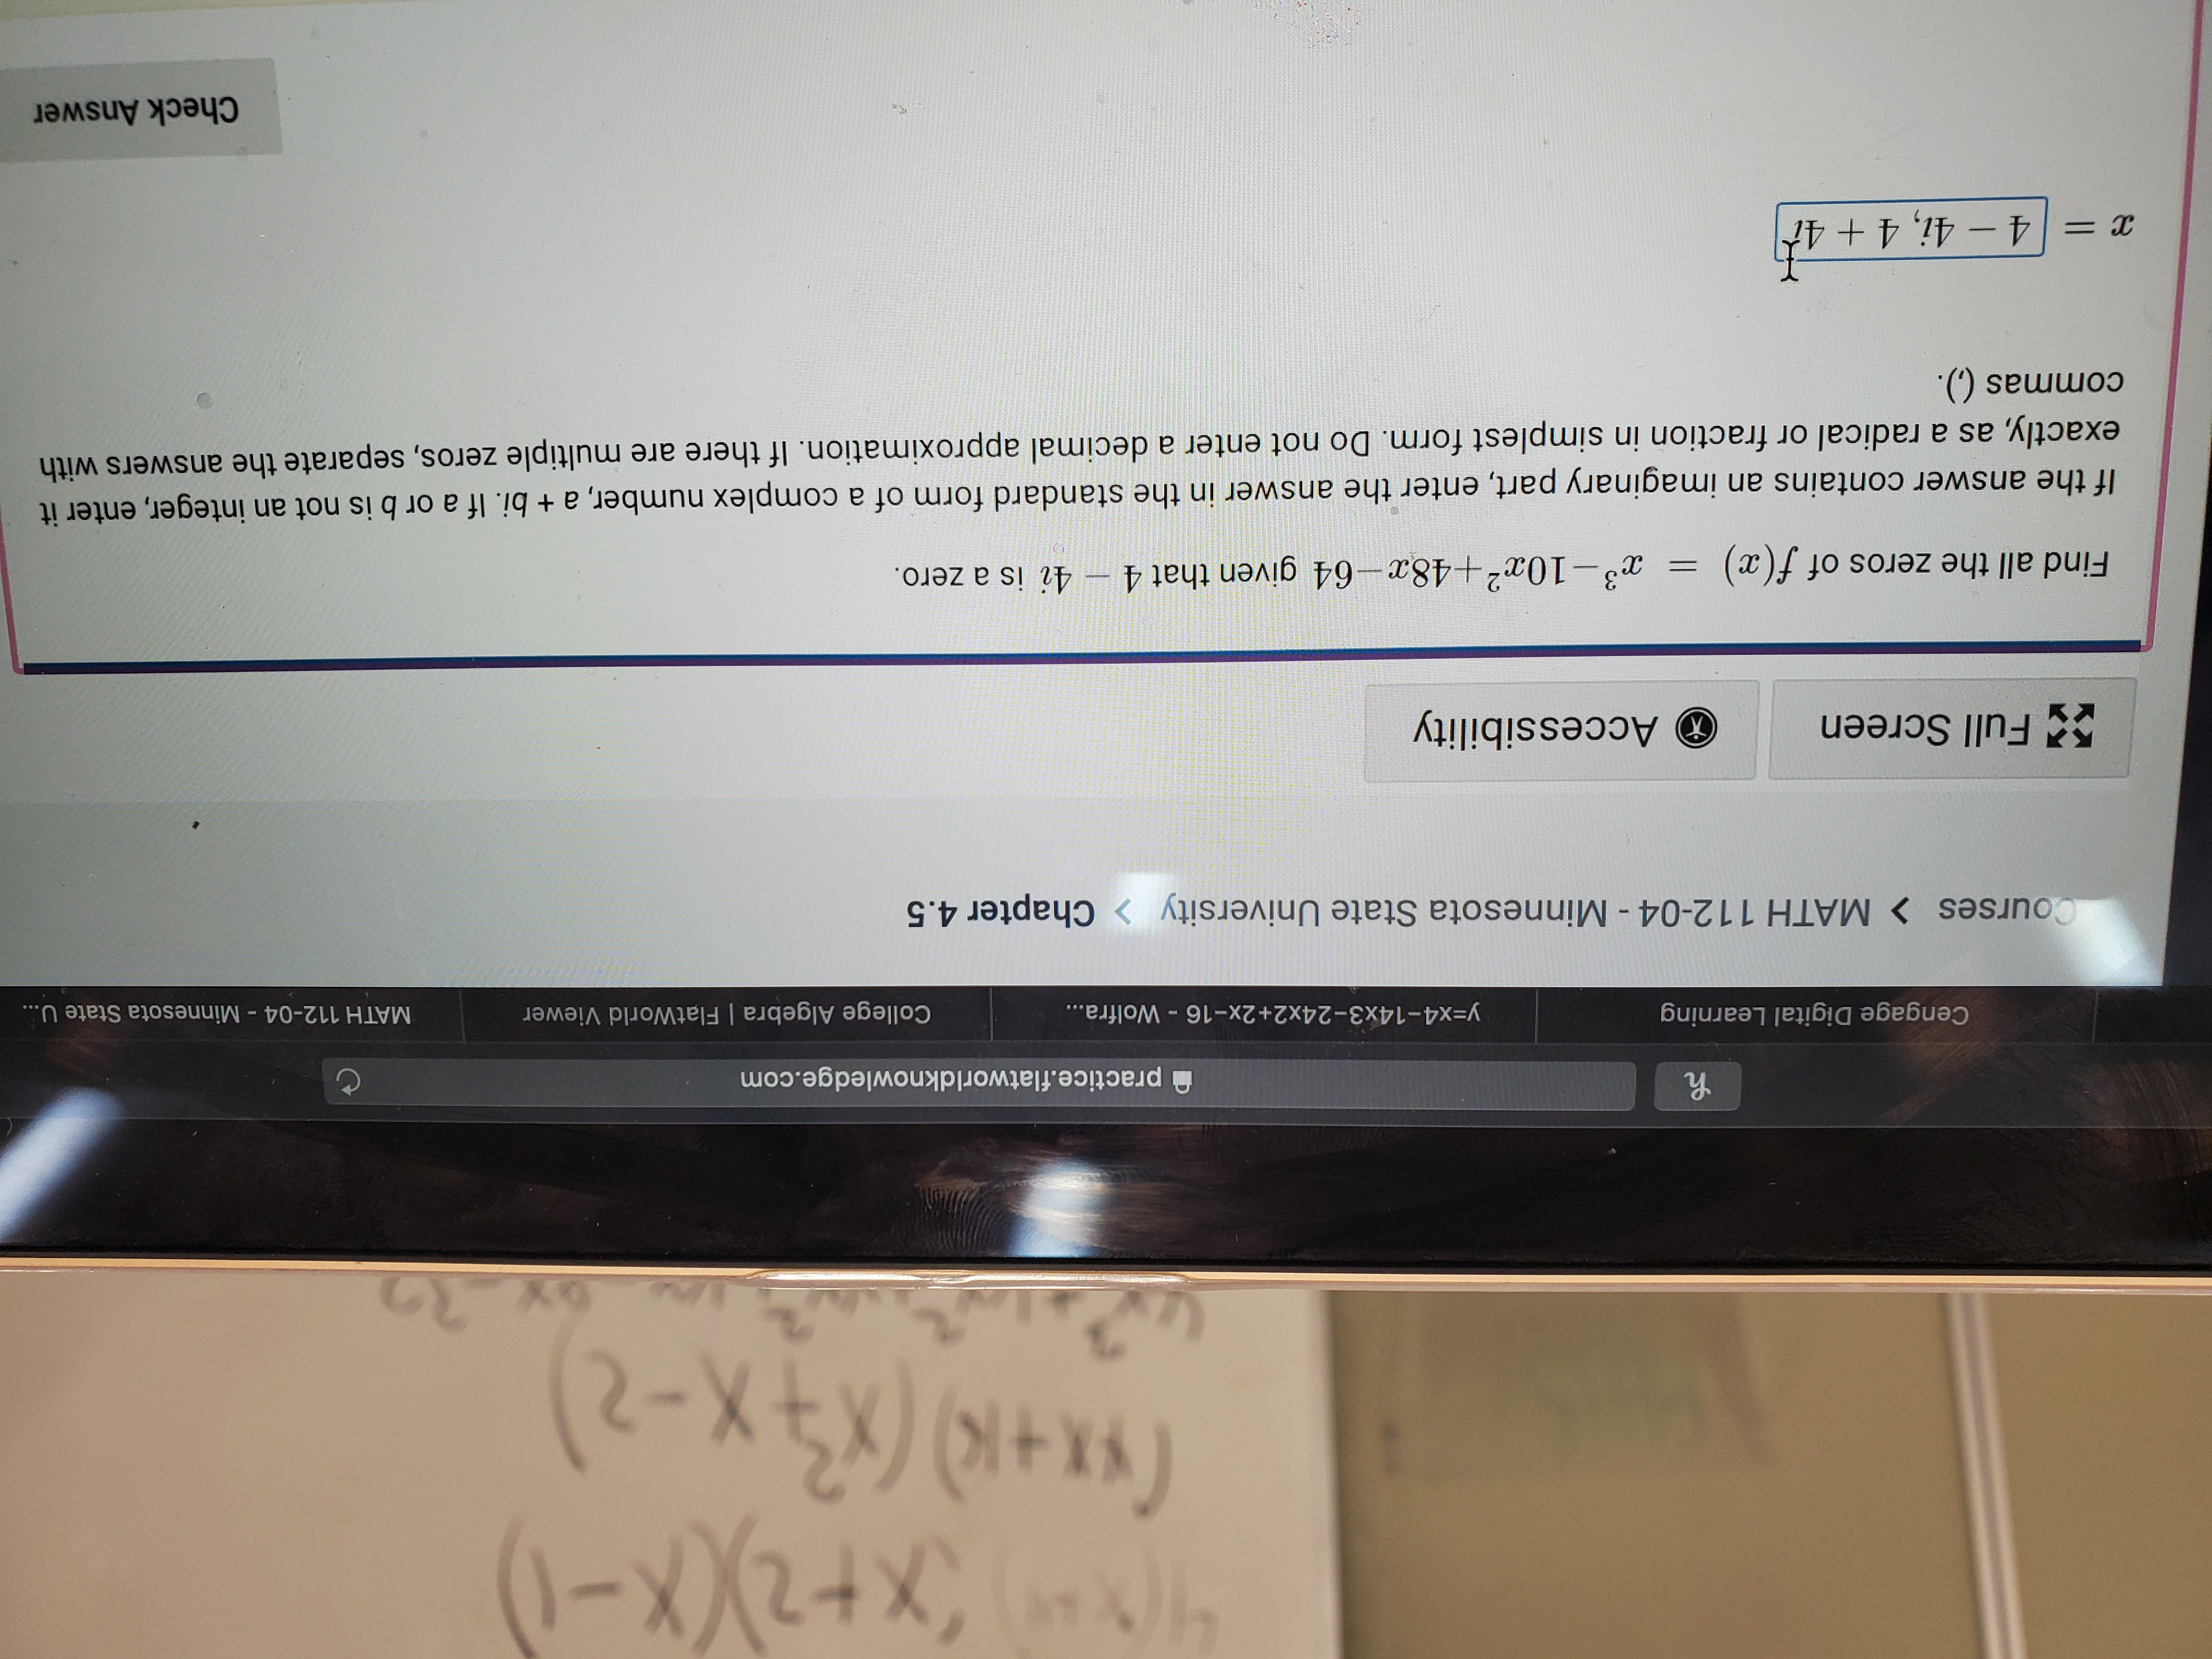 46x+X-)
(x+K) (X-2
practice.flatworldknowledge.com
Cengage Digital Learning
College Algebra | FlatWorld Viewer
y=x4-14x3-24x2+2x-16 - Wolfra...
MATH 112-04 Minnesota State U...
Courses > MATH 112-04 - Minnesota State University
Chapter 4.5
Accessibility
5Full Screen
4i is a zero.
3-10a2+48x-64 given that 4
Find all the zeros of f(x)
If the answer contains an imaginary part, enter the answer in the standard form of a complex number, a + bi. If a or b is not an integer, enter it
exactly, as a radical or fraction in simplest form. Do not enter a decimal approximation. If there are multiple zeros, separate the answers with
commas ().
x = 4 -4i, 4 +4t
Check Answer
